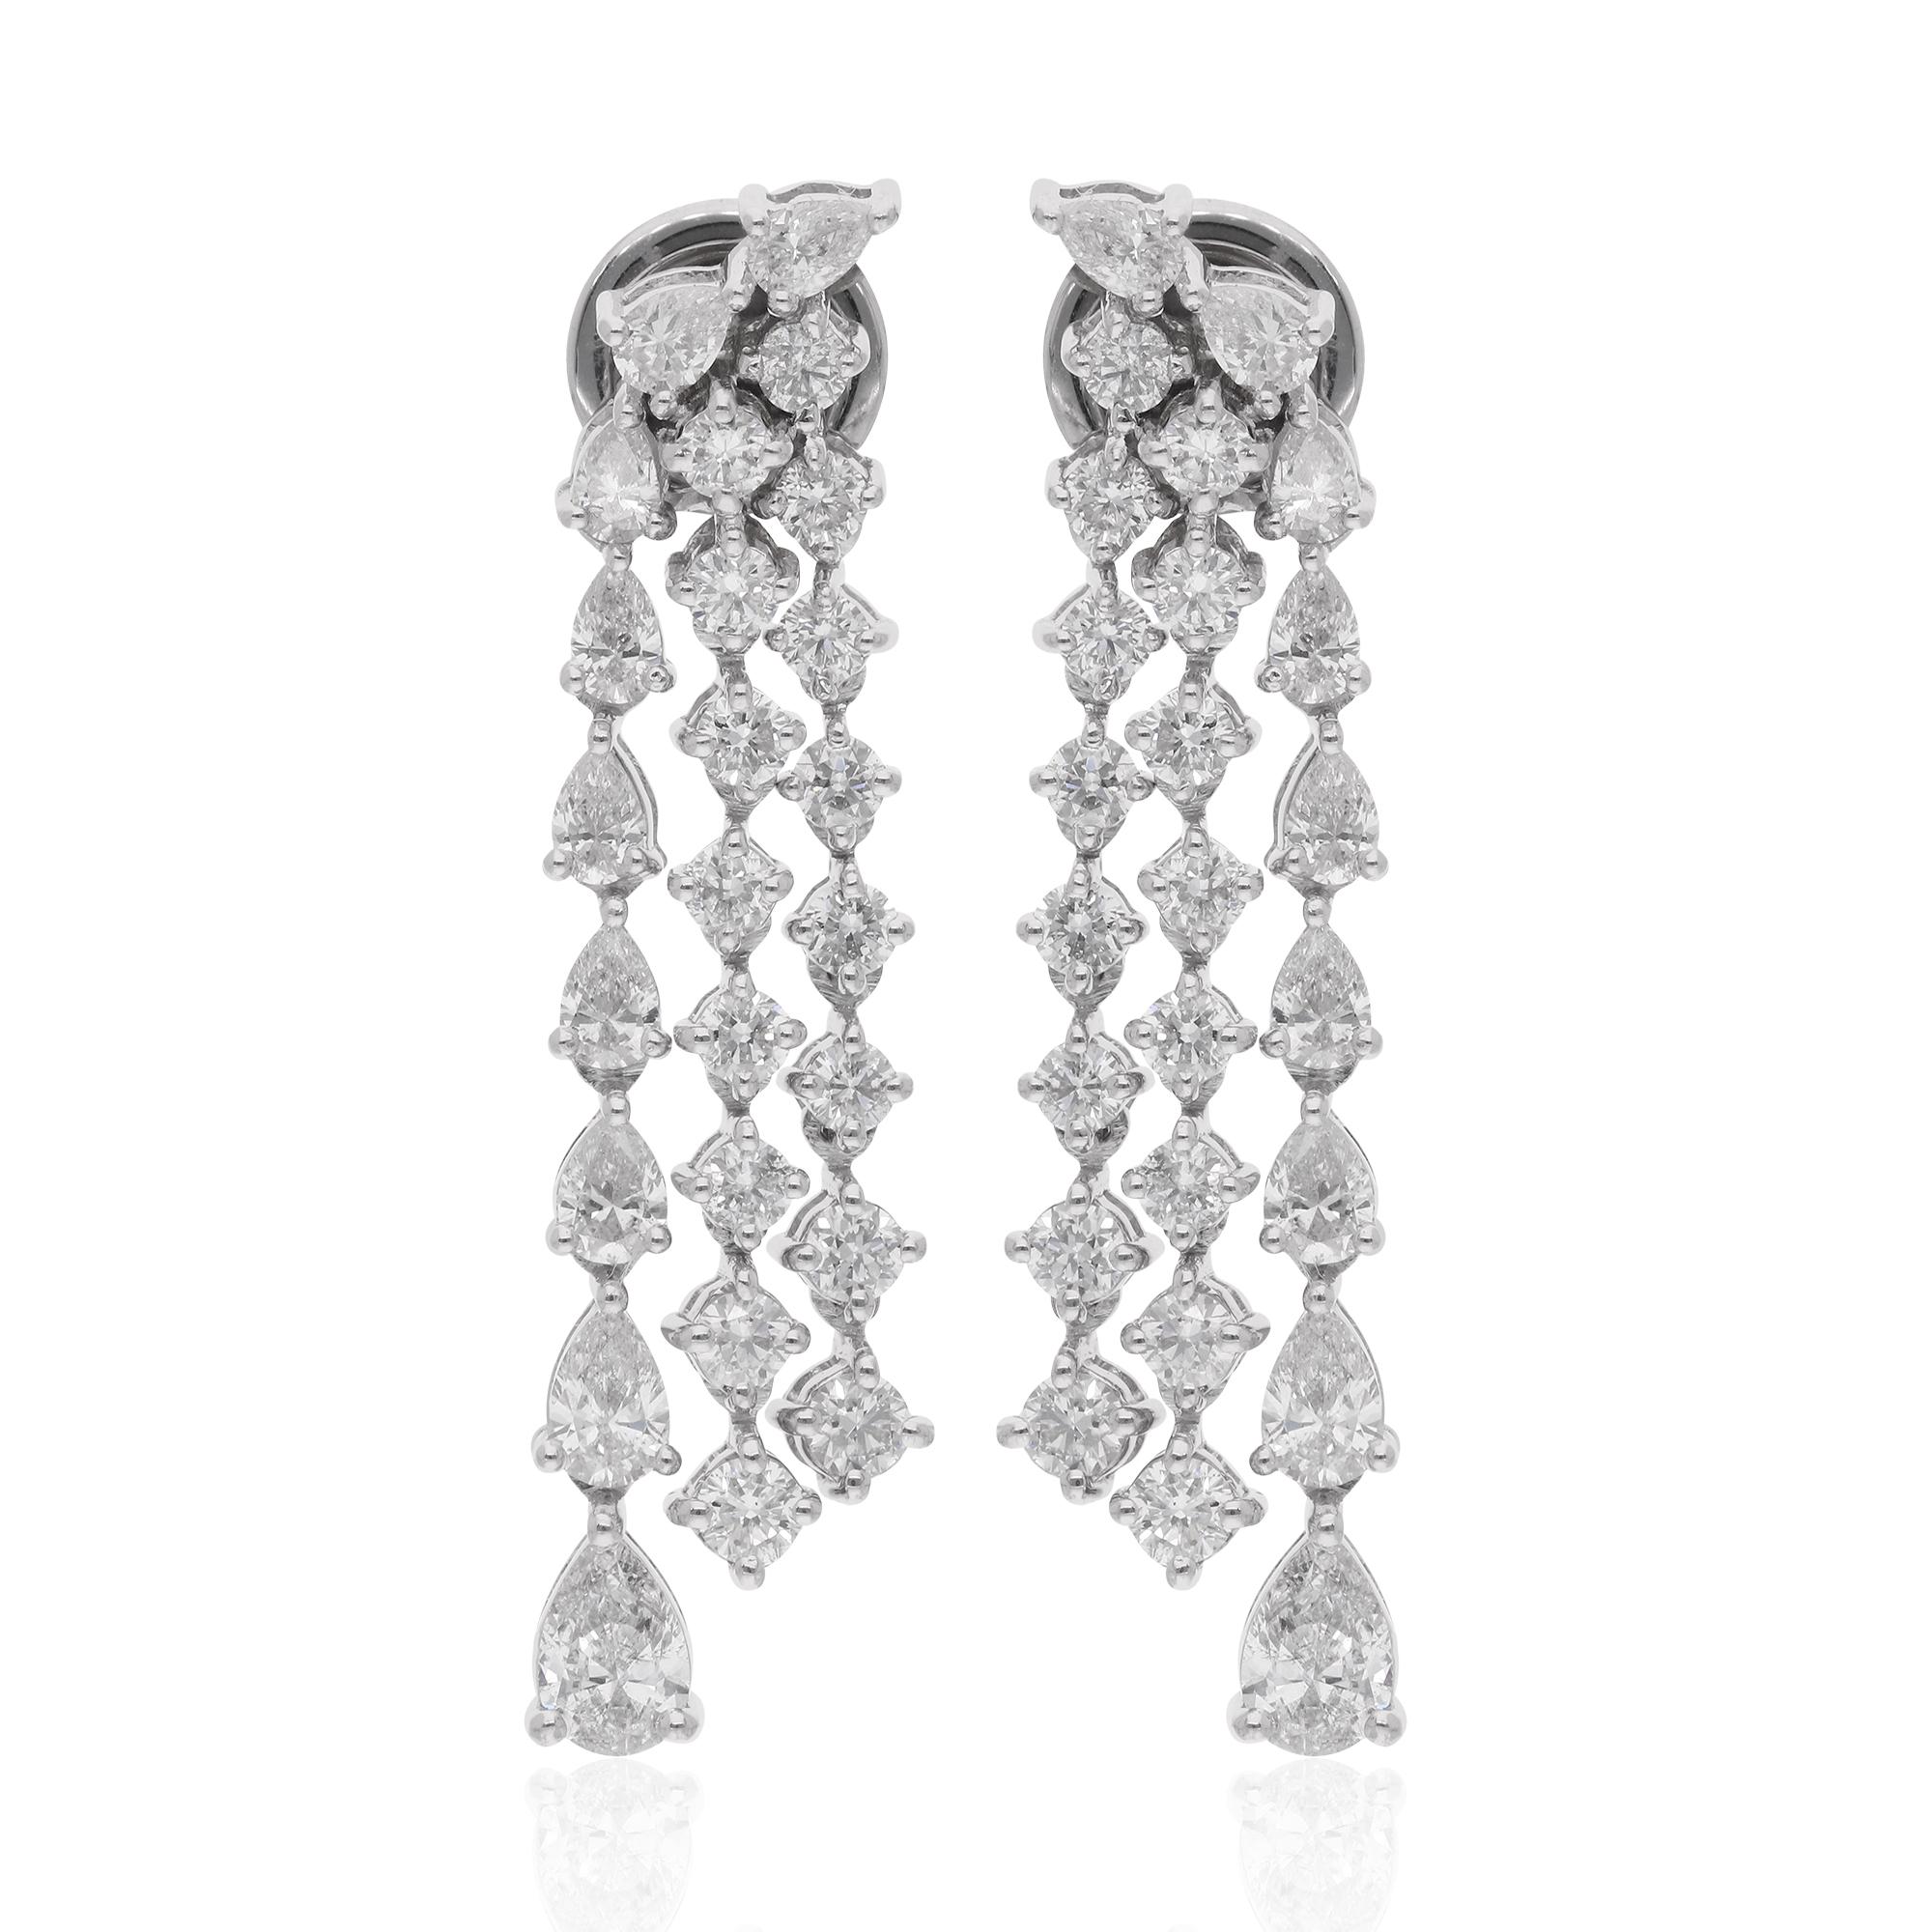 These exquisite chandelier earrings are crafted in 14 karat white gold and feature a captivating combination of pear-shaped and round diamonds with a total carat weight of 2.76 carats. The pear-shaped diamonds, known for their elegant and elongated